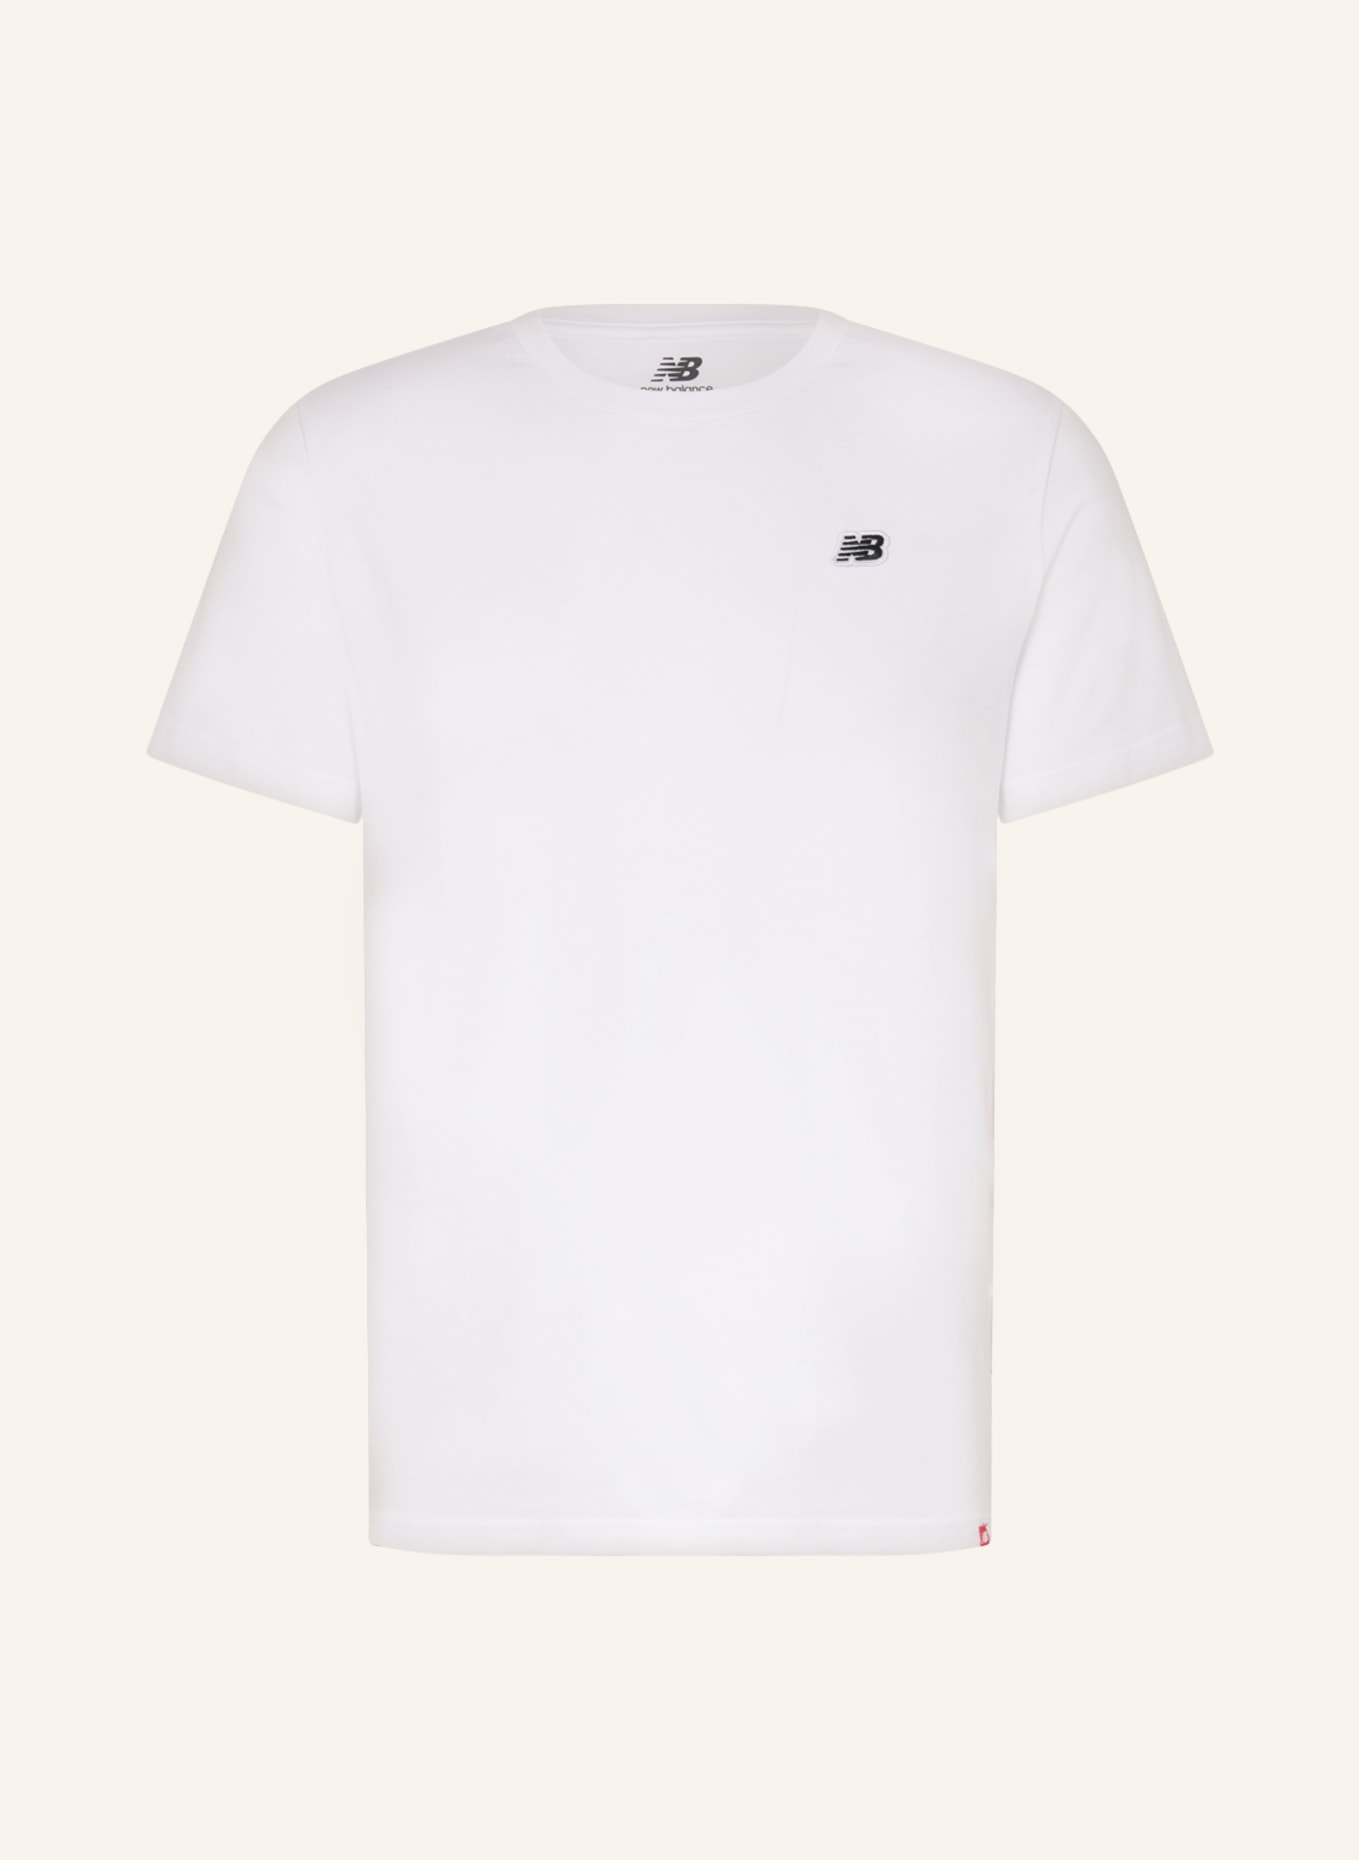 in T-shirt SMALL balance white new NB